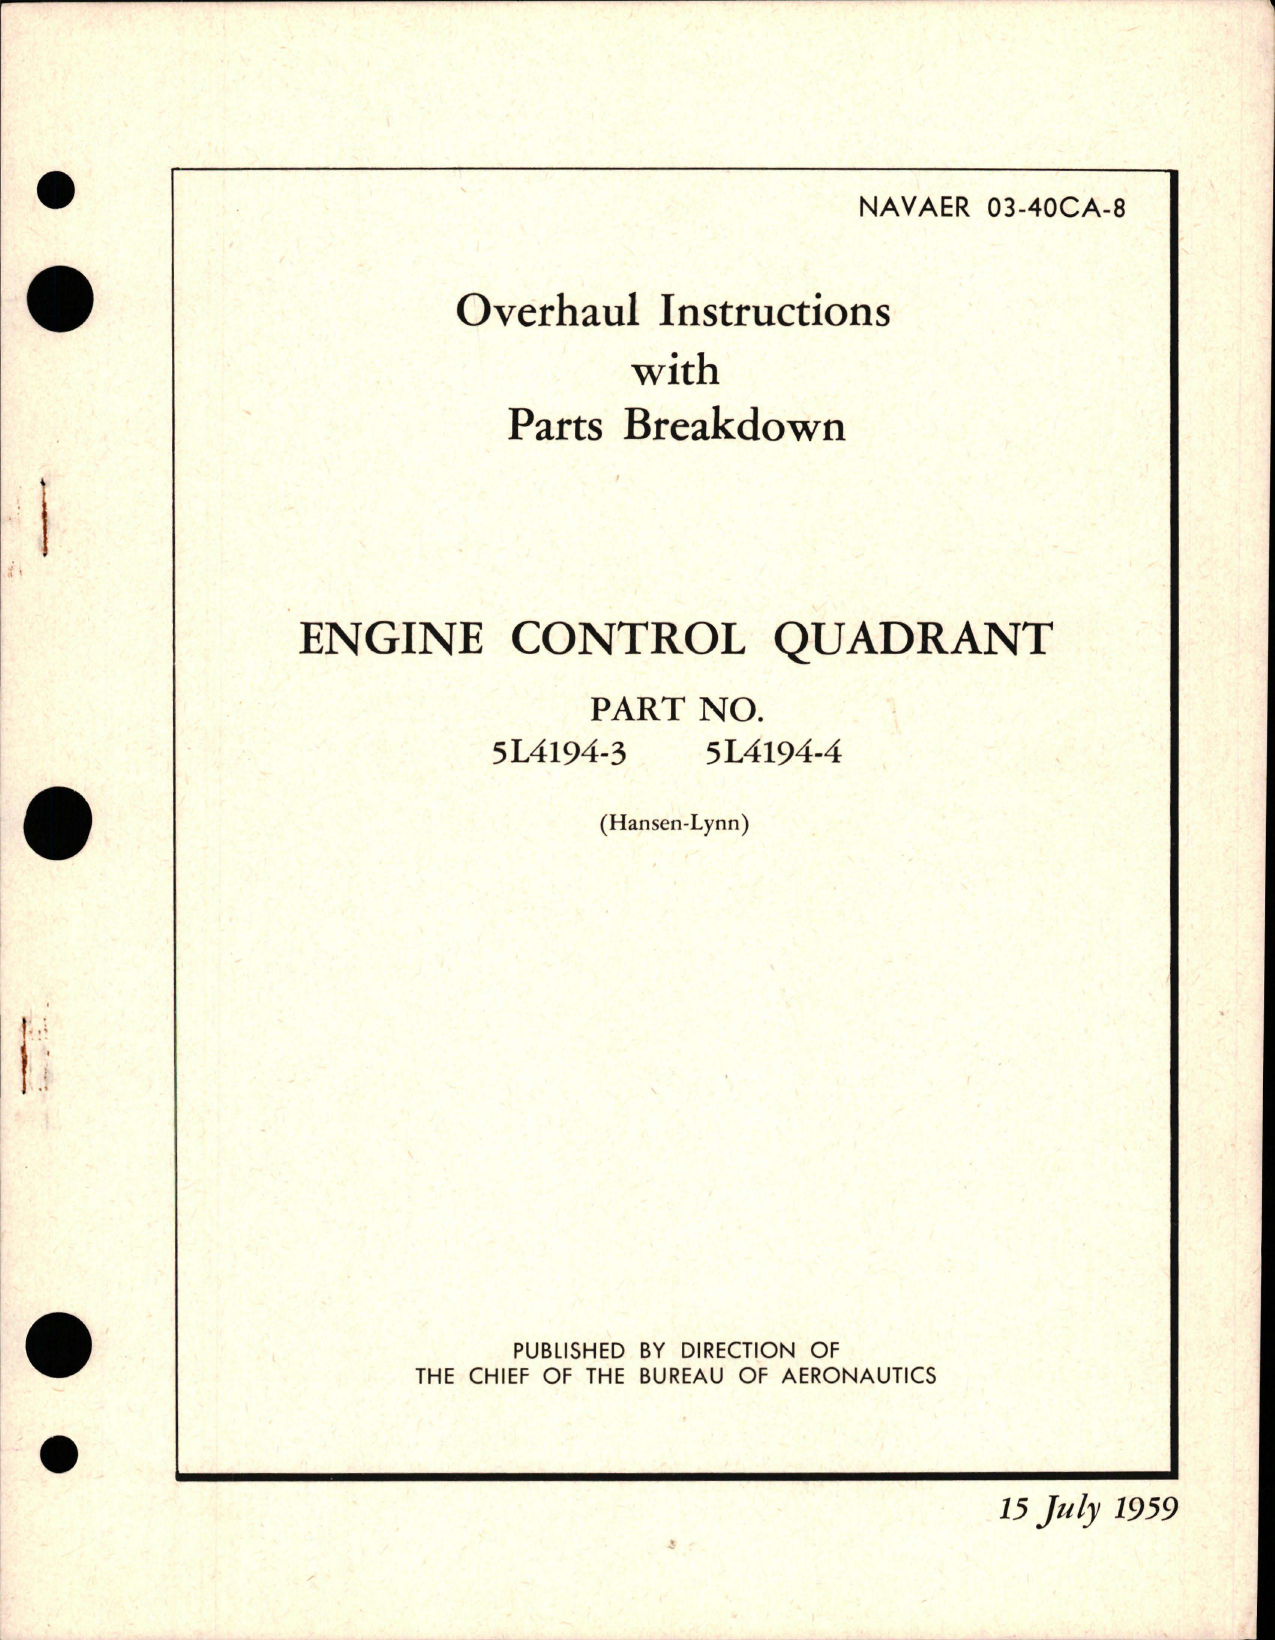 Sample page 1 from AirCorps Library document: Overhaul Instructions with Parts Breakdown for Engine Control Quadrant - Parts 5L4194-3 and 5L4194-4